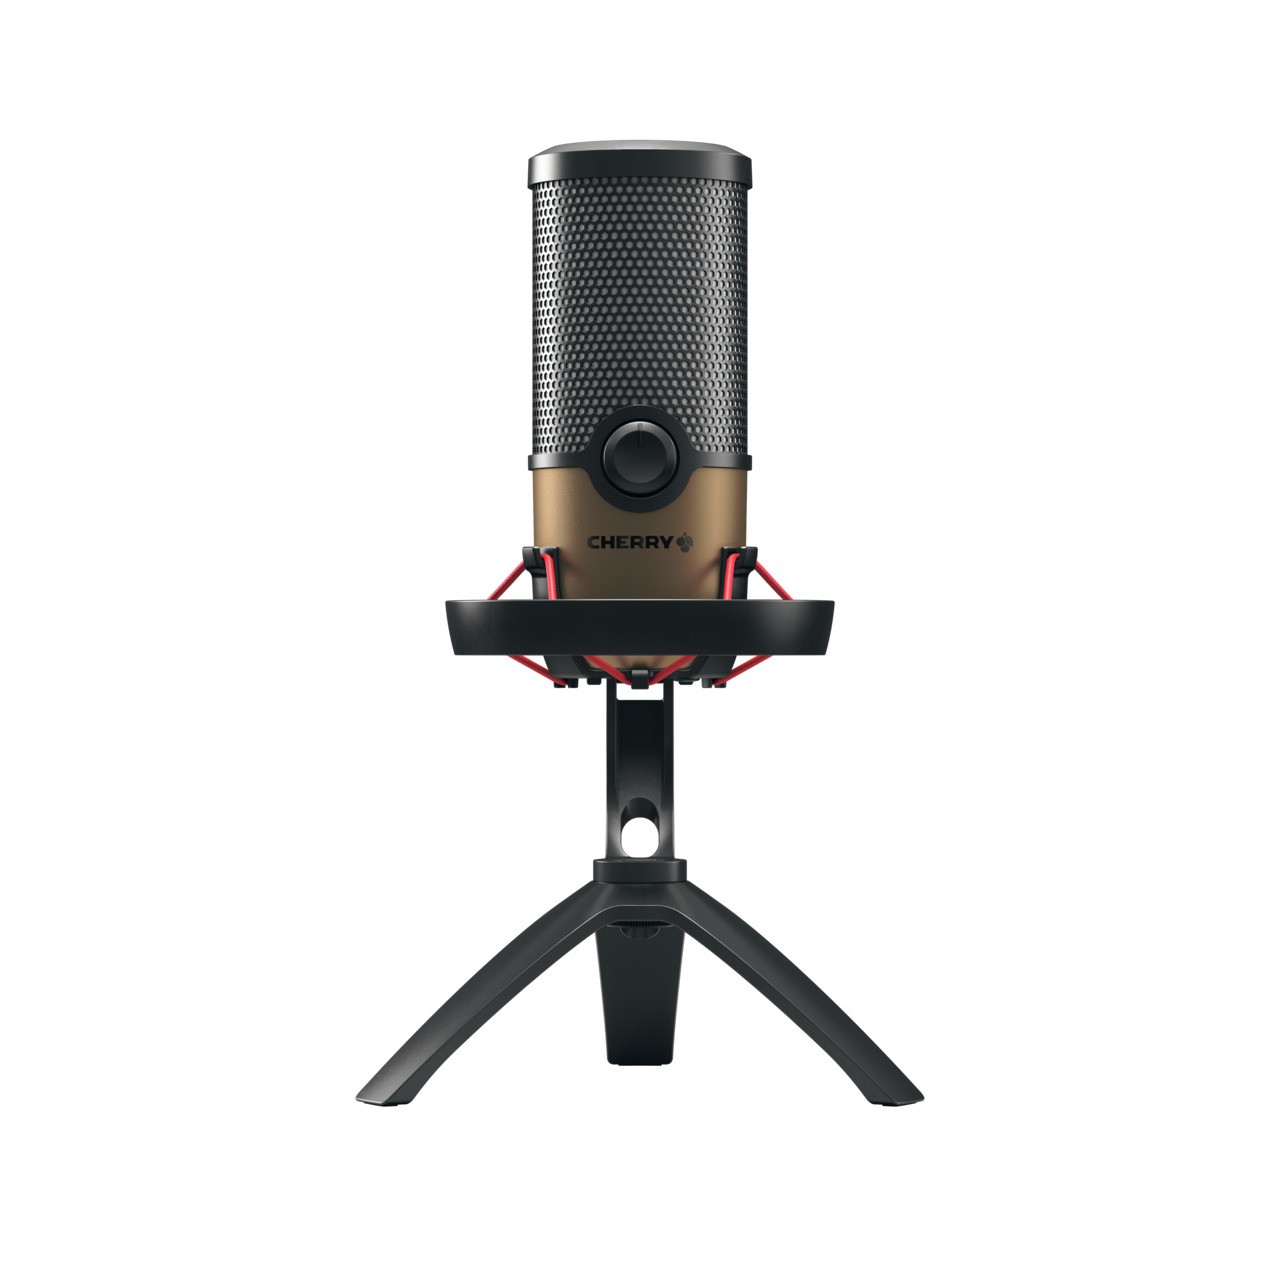 CHERRY UM 9.0 USB MICROPHONE WITH IMPRESSIVE RGB ILLUMINATION FOR STREAMING AND